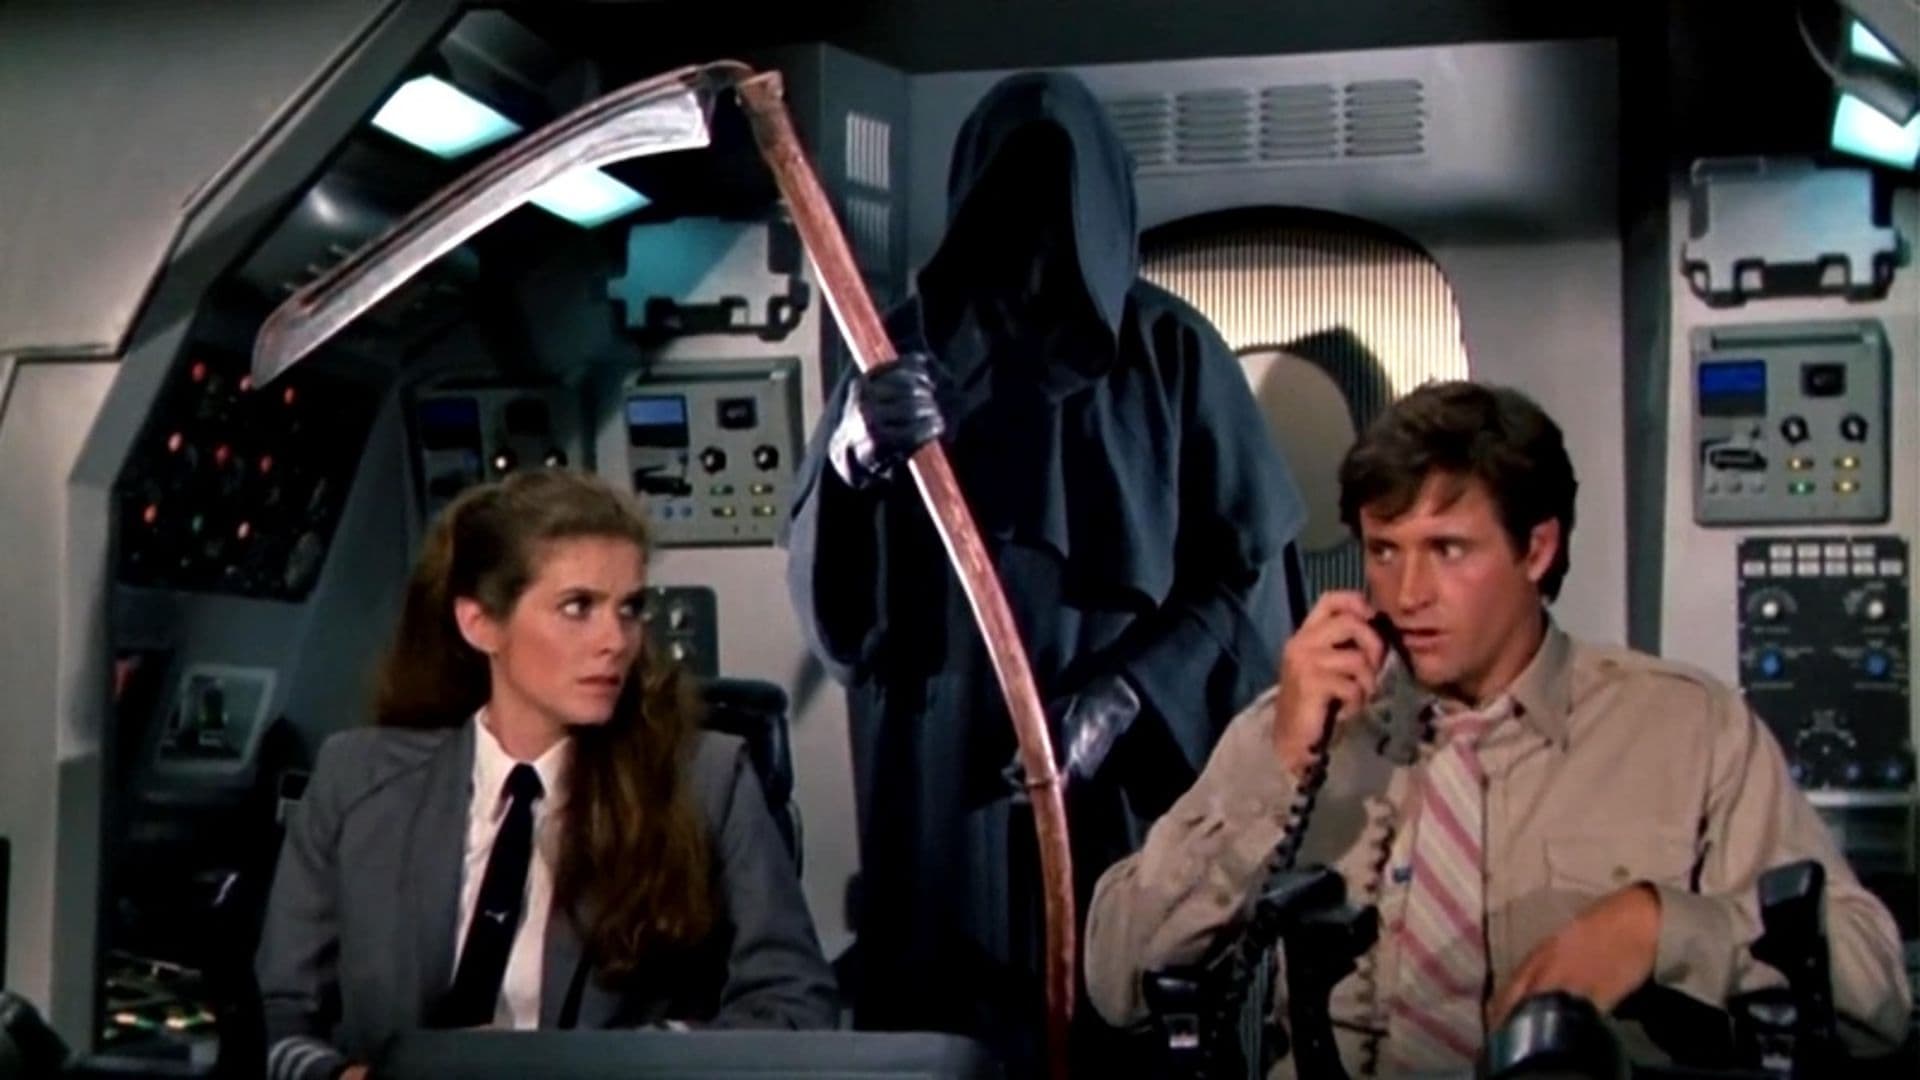 Airplane II: The Sequel (1982)